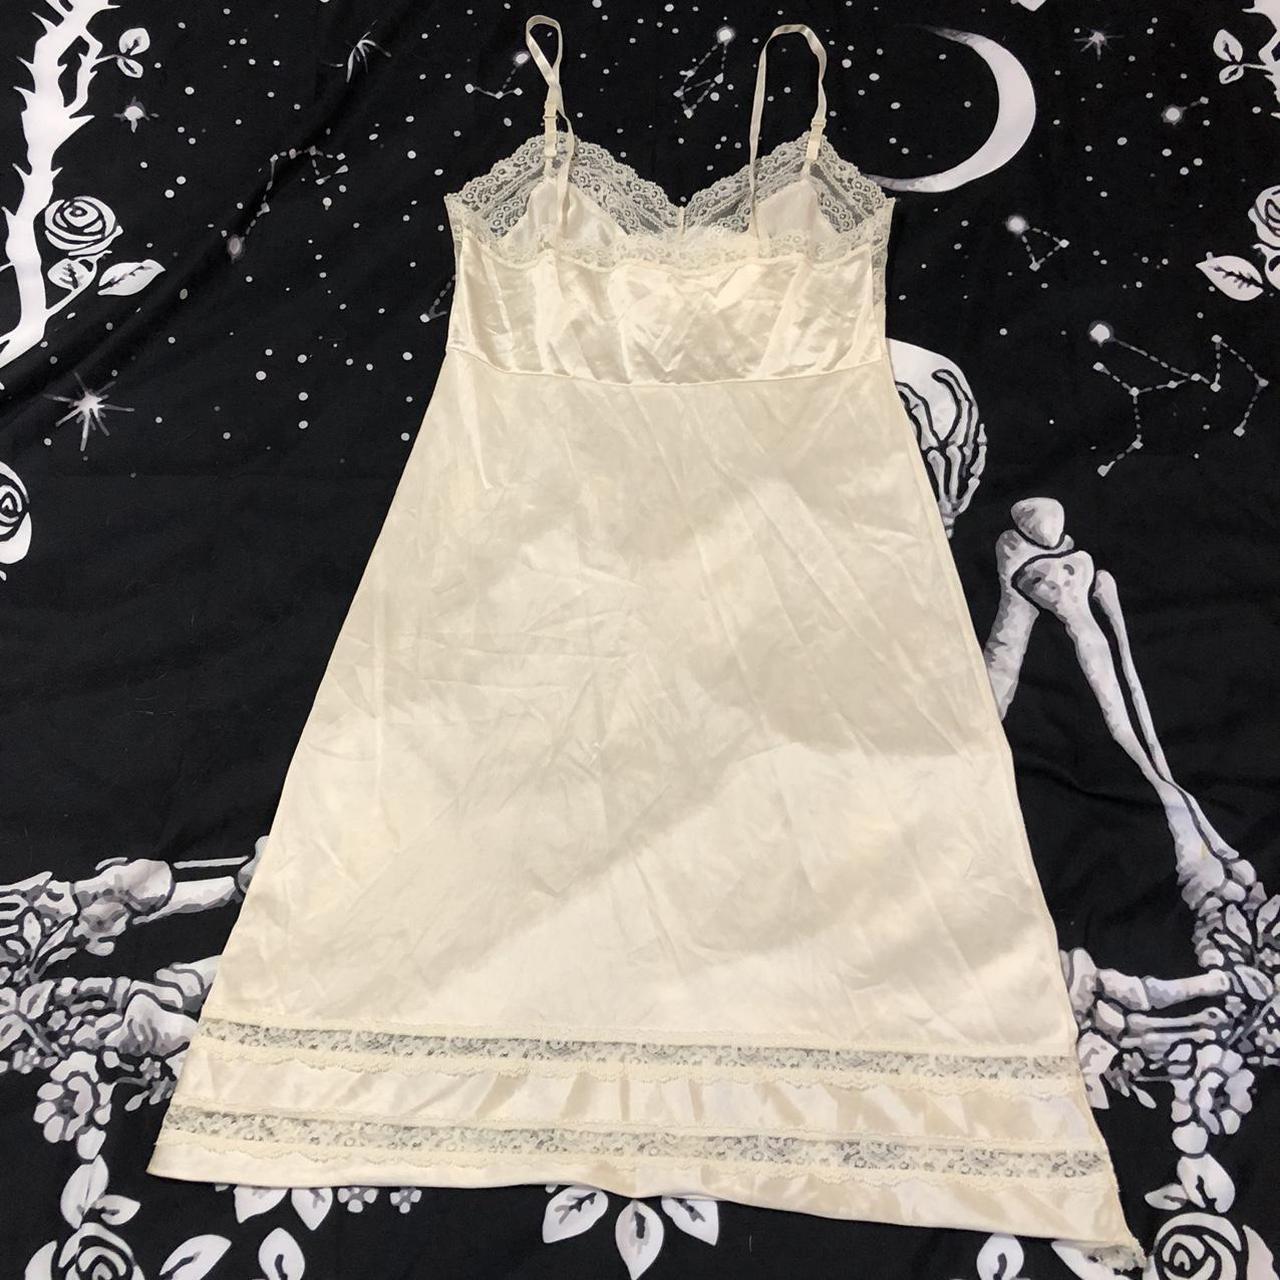 Product Image 3 - White slip dress lace nightgown